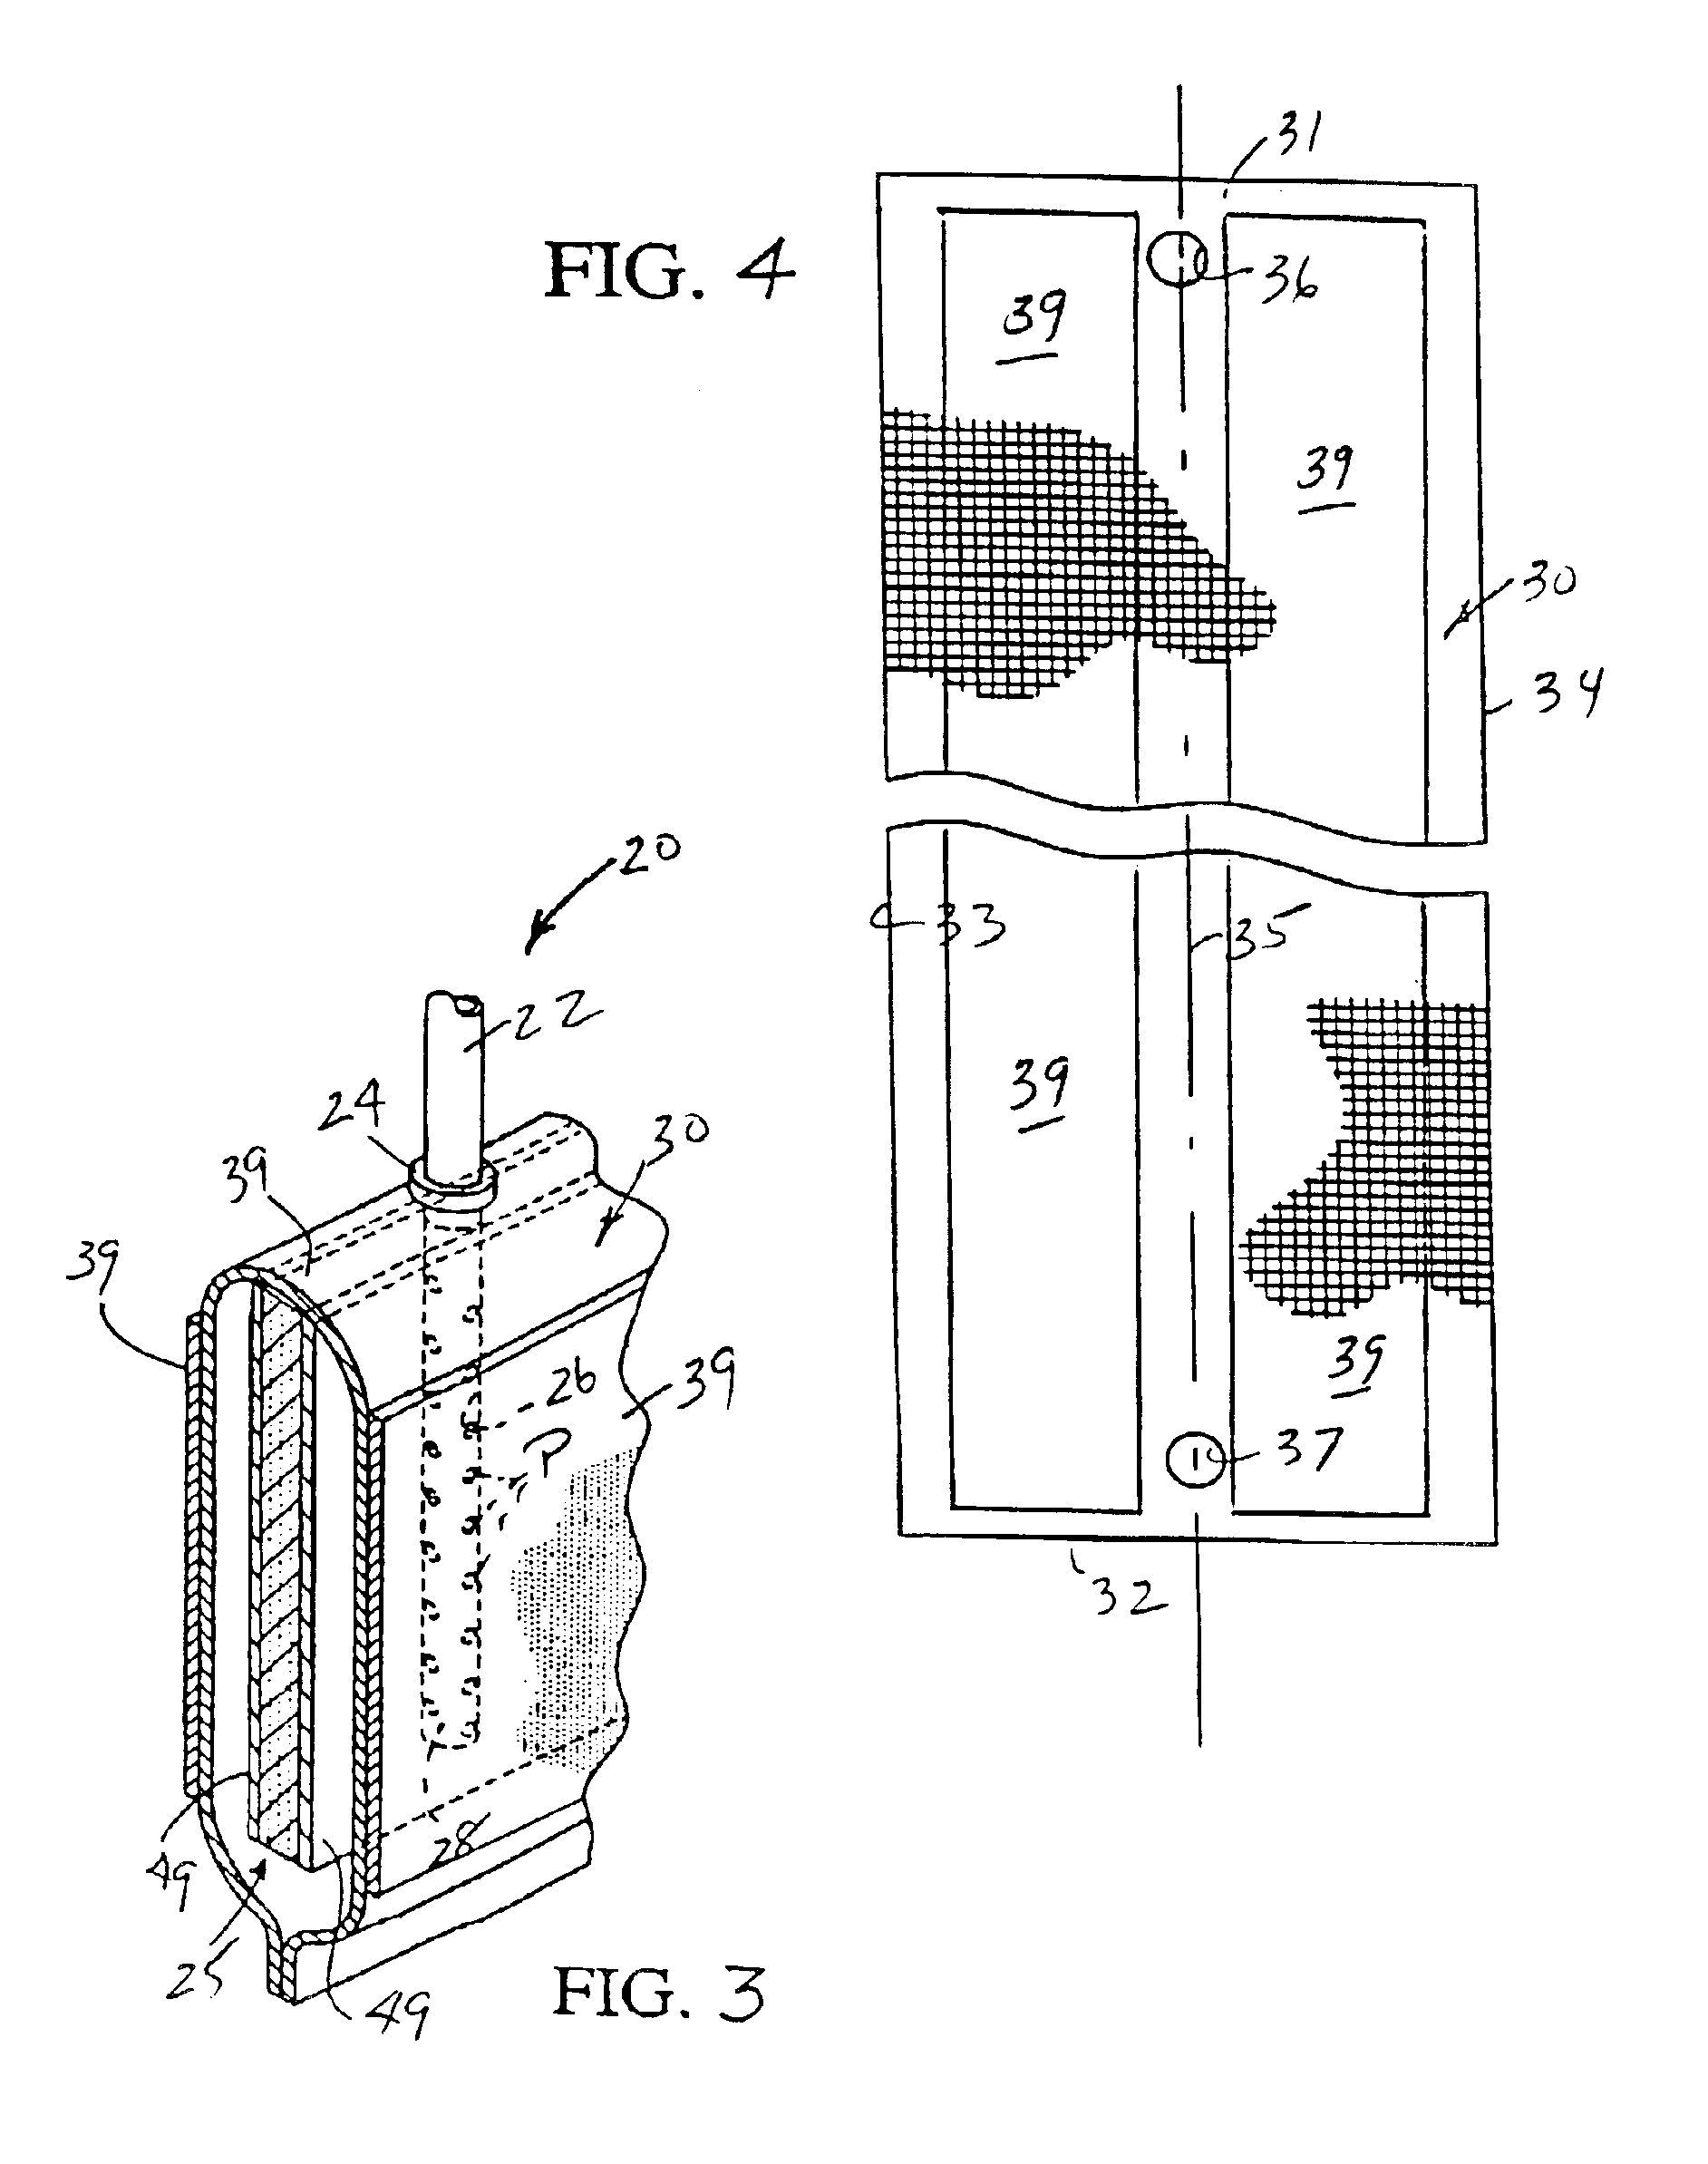 Apparatus for converting a fluid into at least two gasses through electrolysis